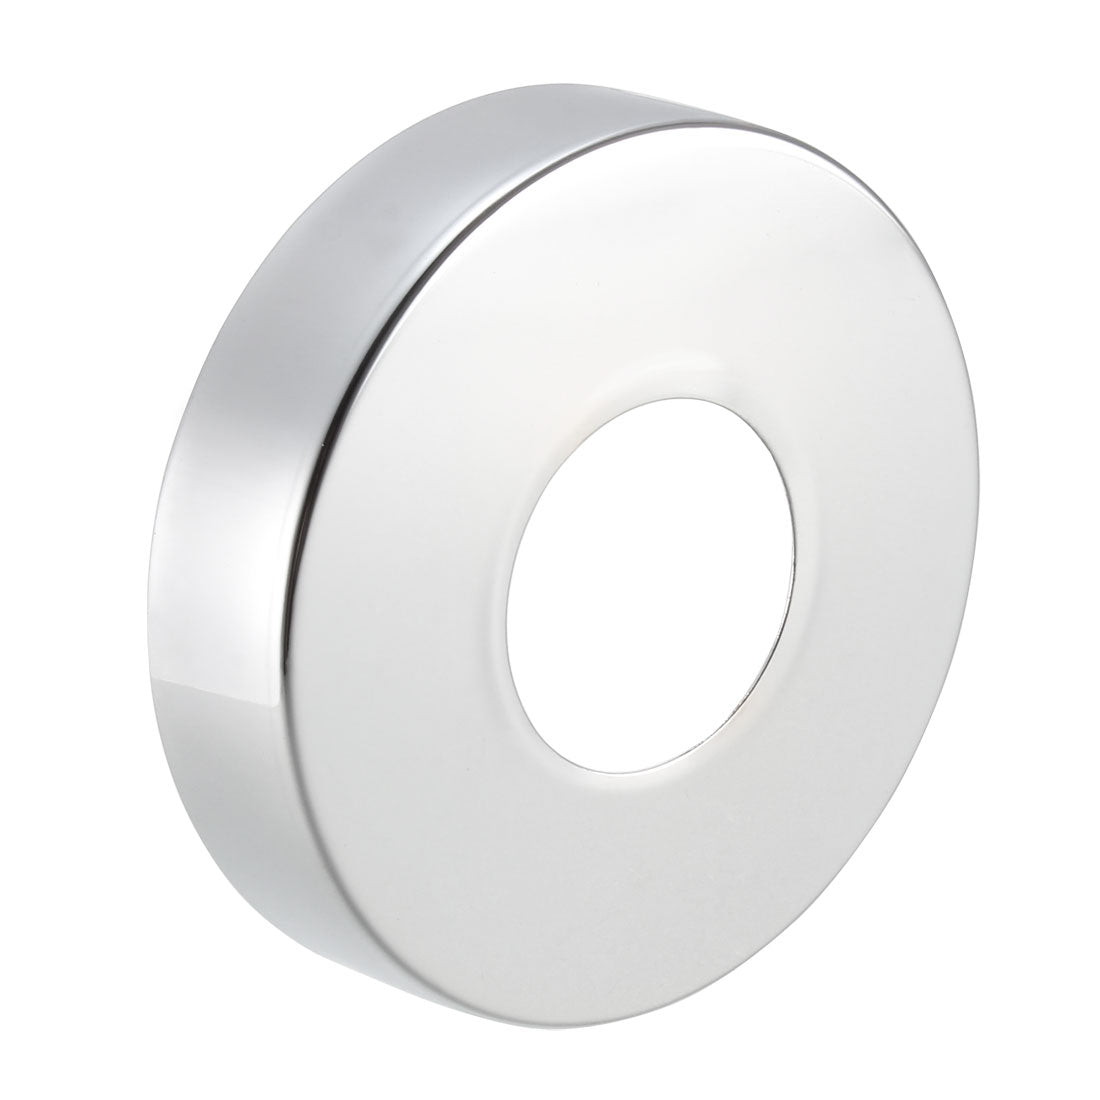 uxcell Uxcell Round Escutcheon Plate 80x19mm Stainless Steel Polishing for 33mm Diameter Pipe